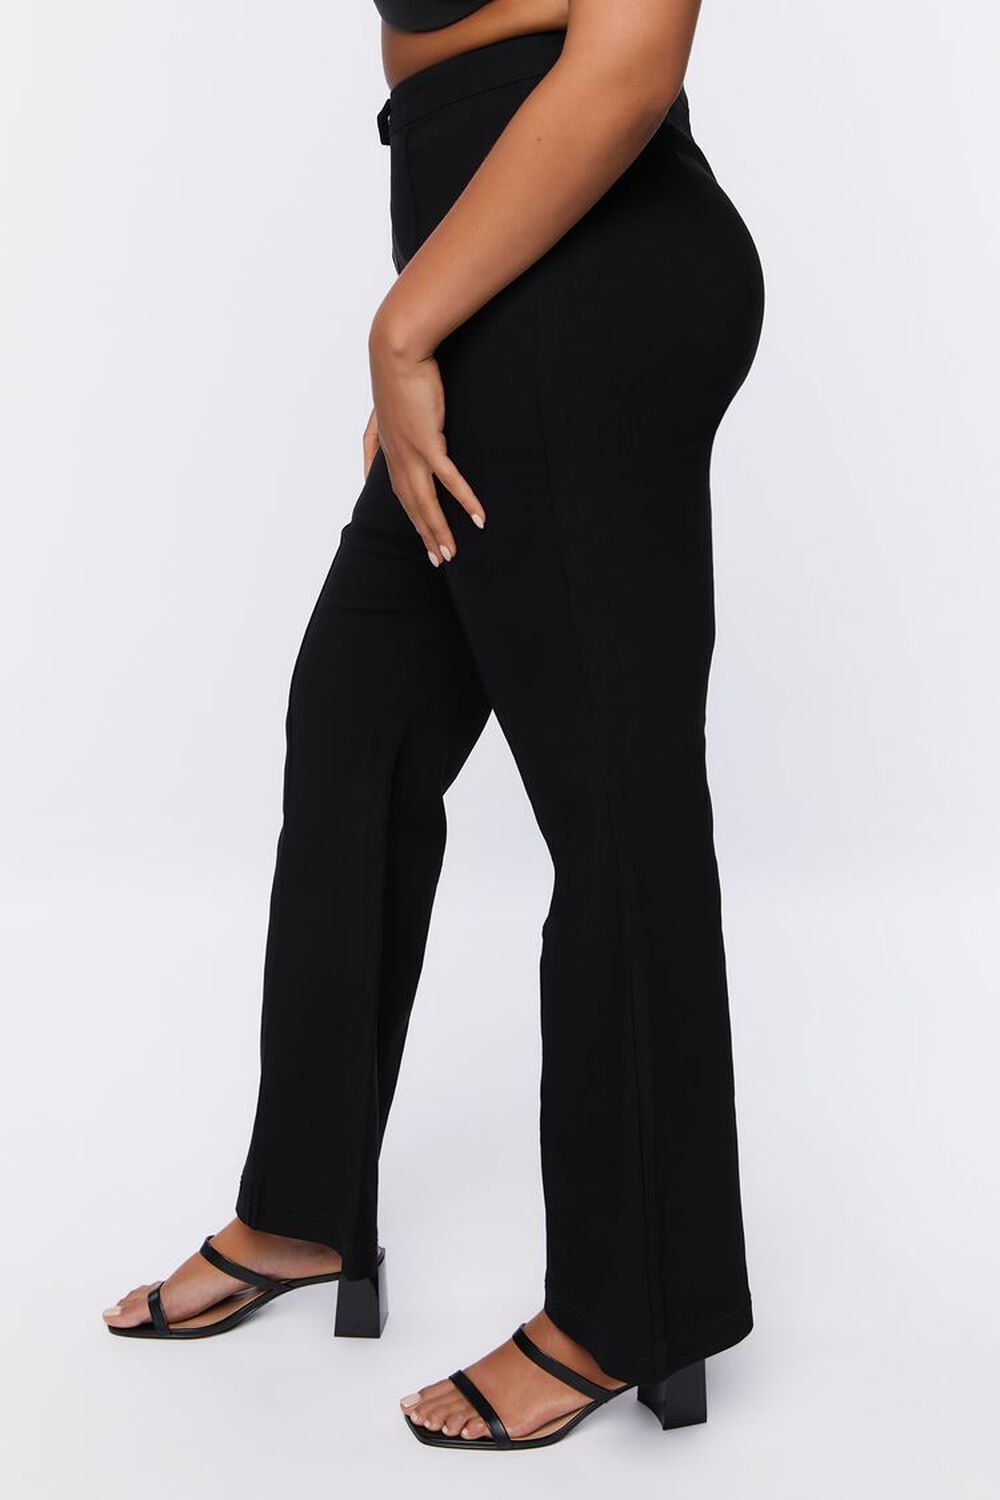 Plus Size High-Rise Flare Pants, image 3